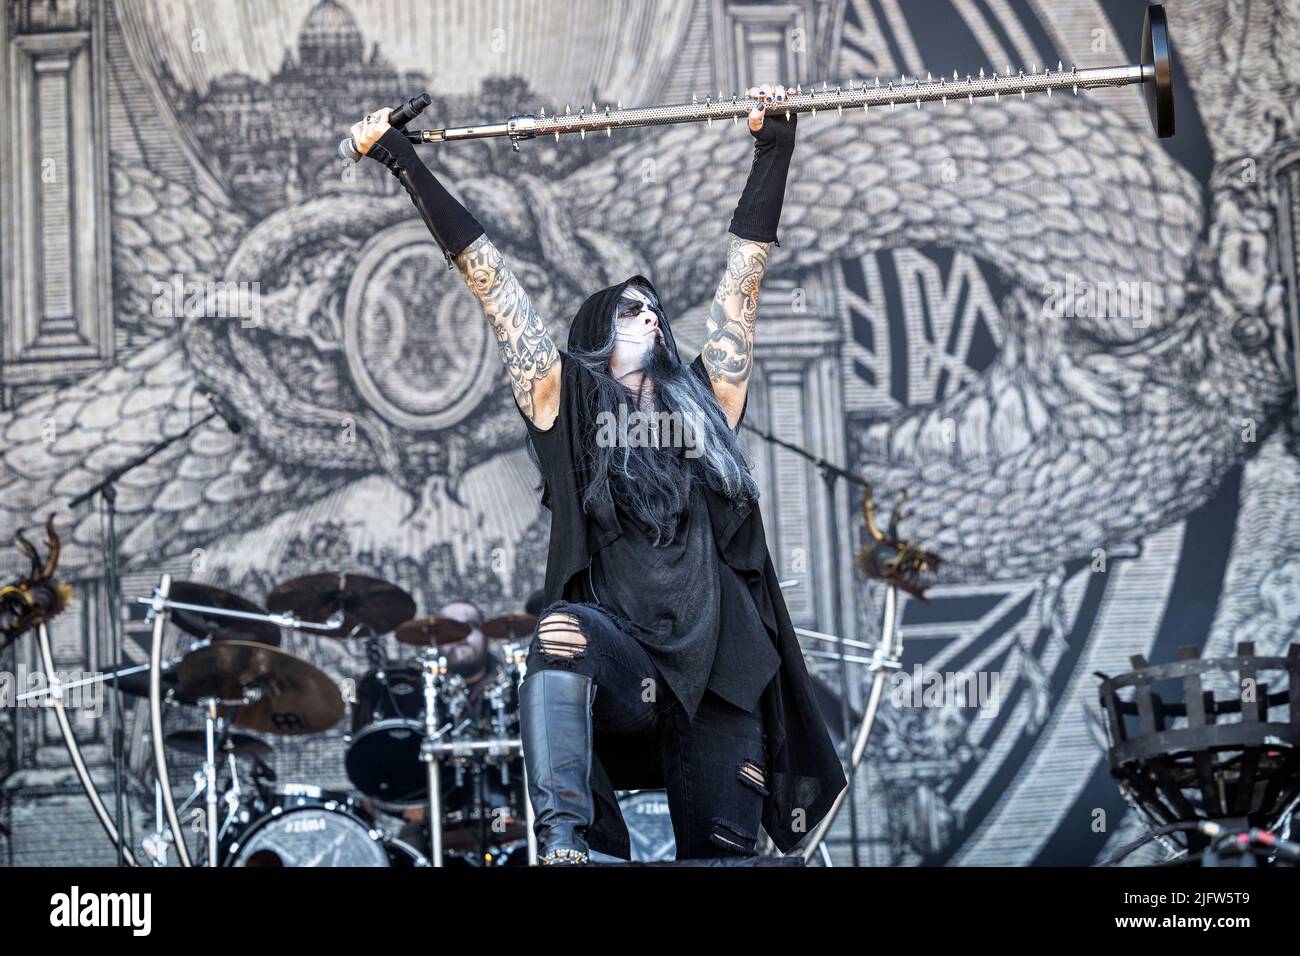 𝑯𝑬𝑨𝑽𝒀 𝑴𝑬𝑻𝑨𝑳Ⓒ on X: Stian Tomt Thoresen better known as ''Shagrath''  was born on November 18, 1976 in Akershus, Norway. He is the singer of the  Norwegian symphonic black metal band Dimmu